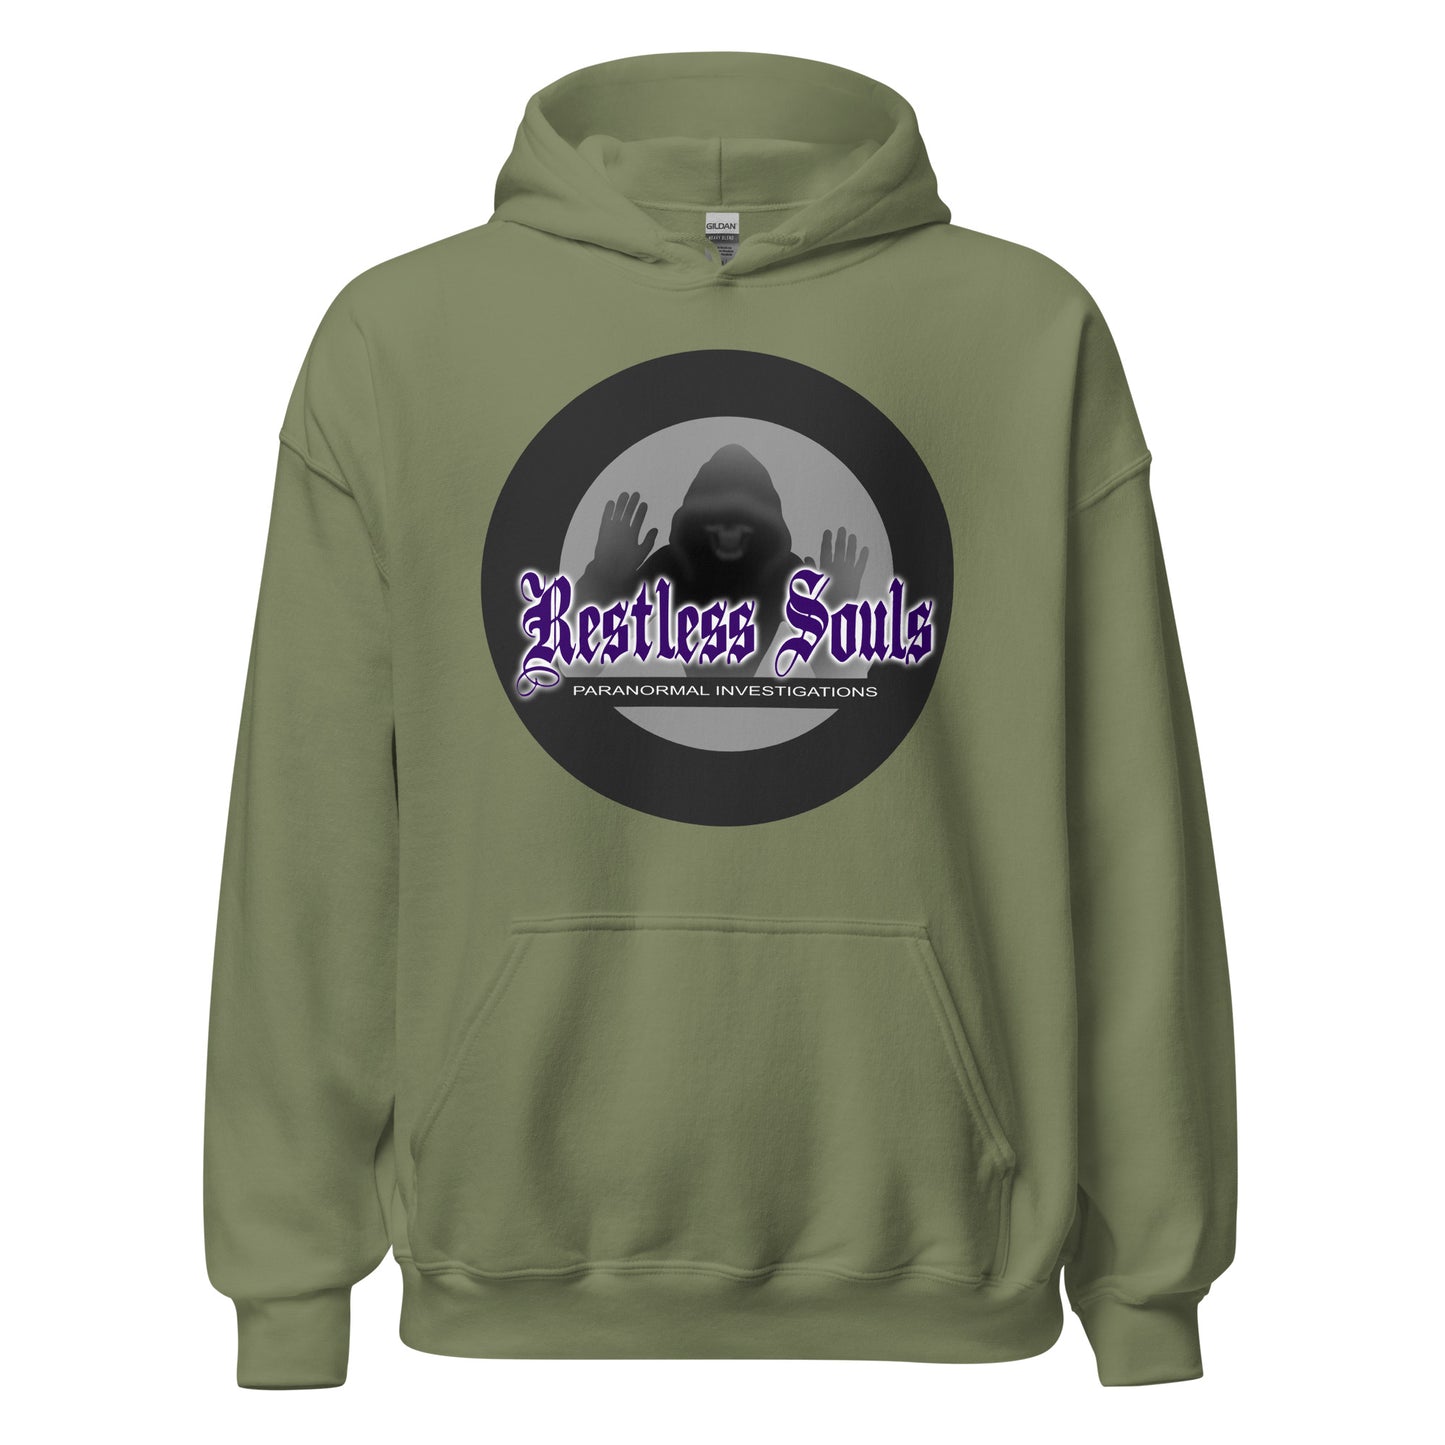 Commissions - restless souls logo hoodie, army green